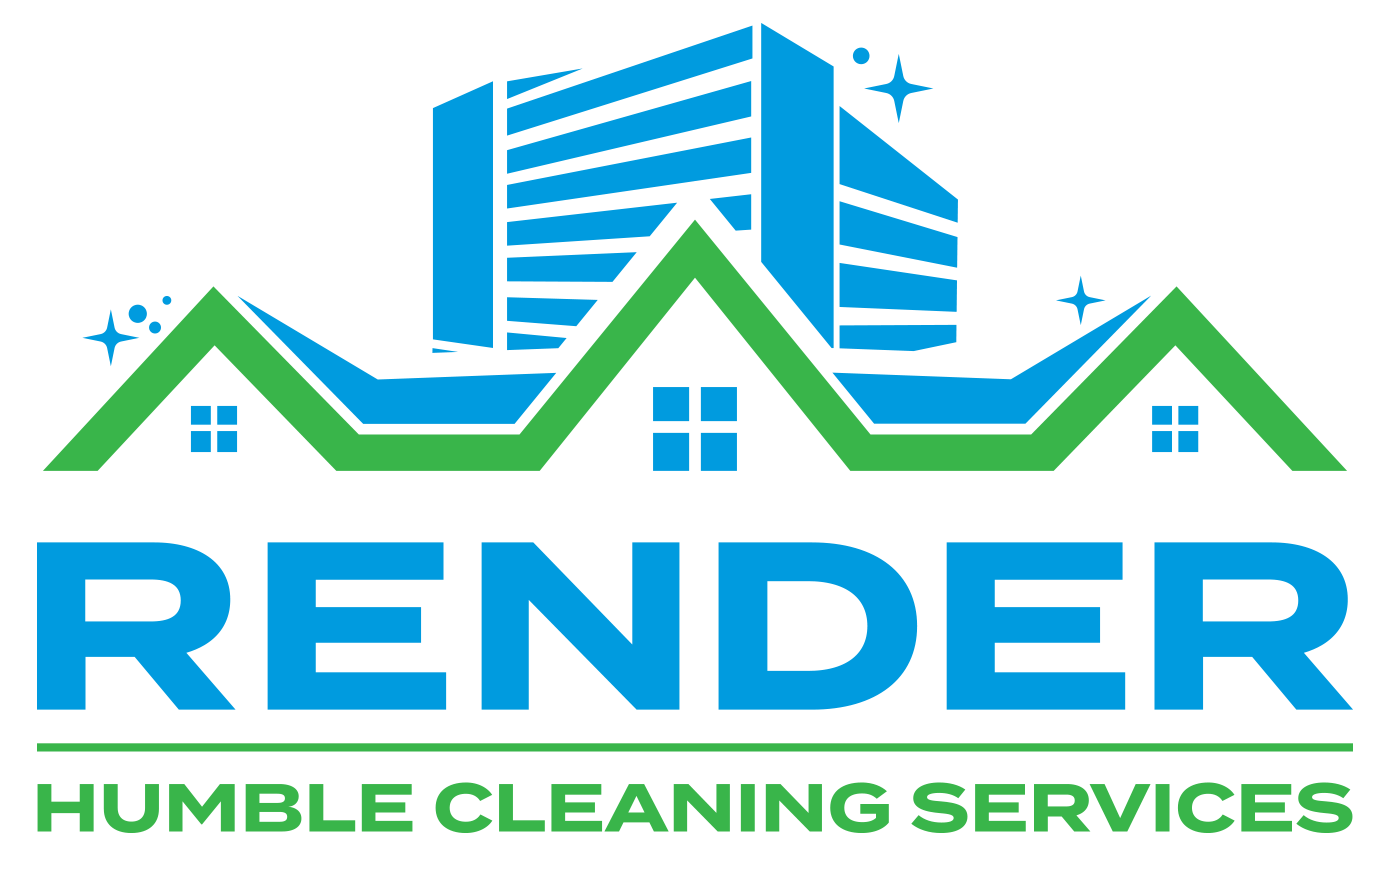 Render Humble Cleaning Services, LLC